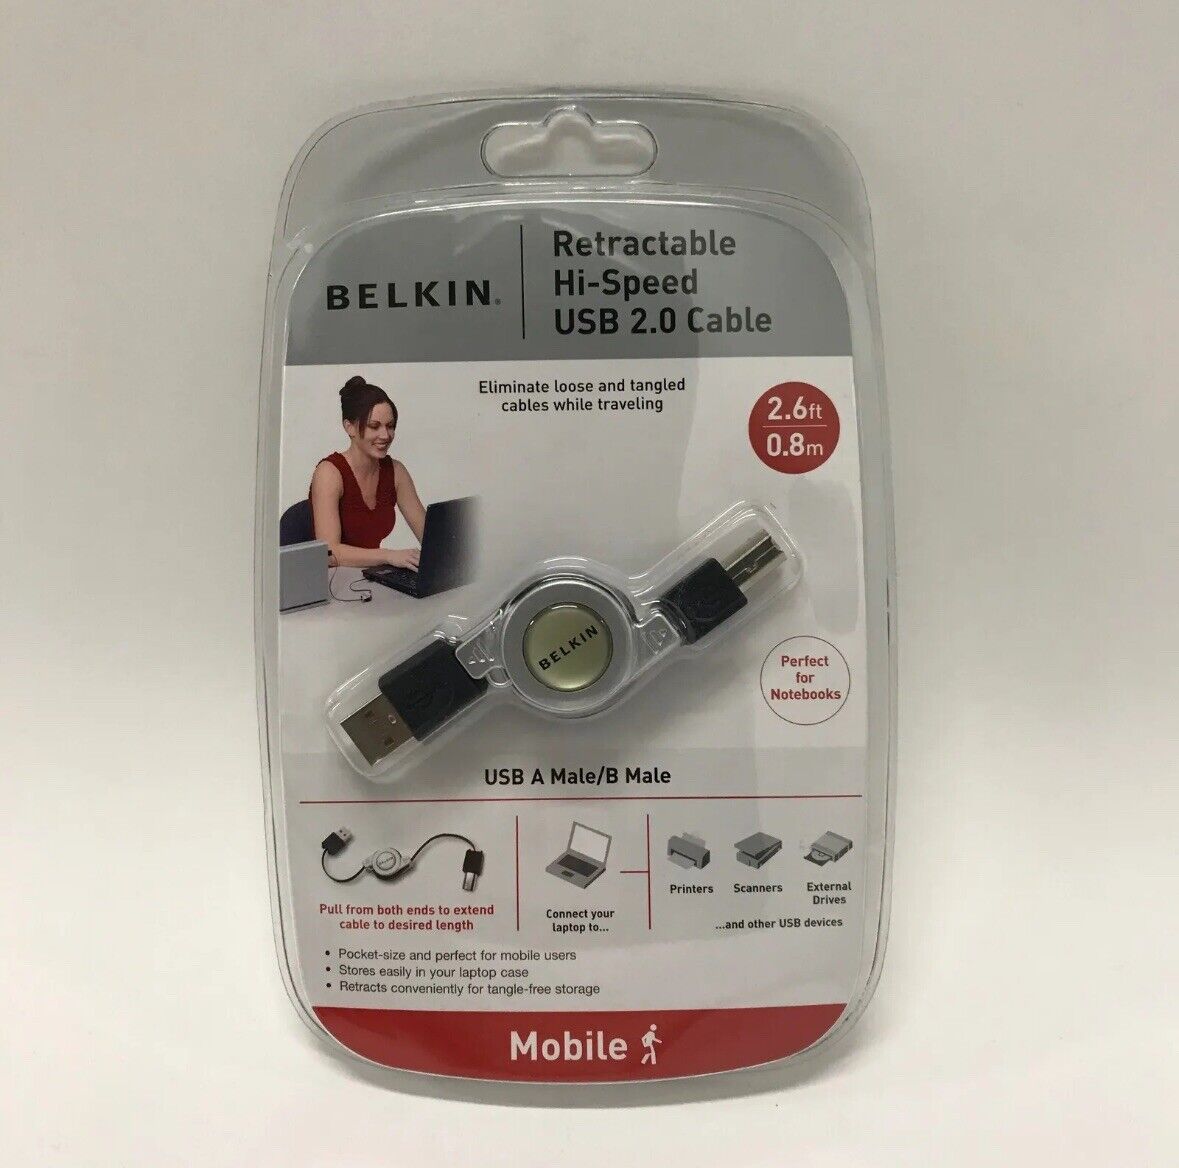 Belkin Retractable USB-A To USB-B Hi-Speed USB 2.0 Cable - 2.6FT